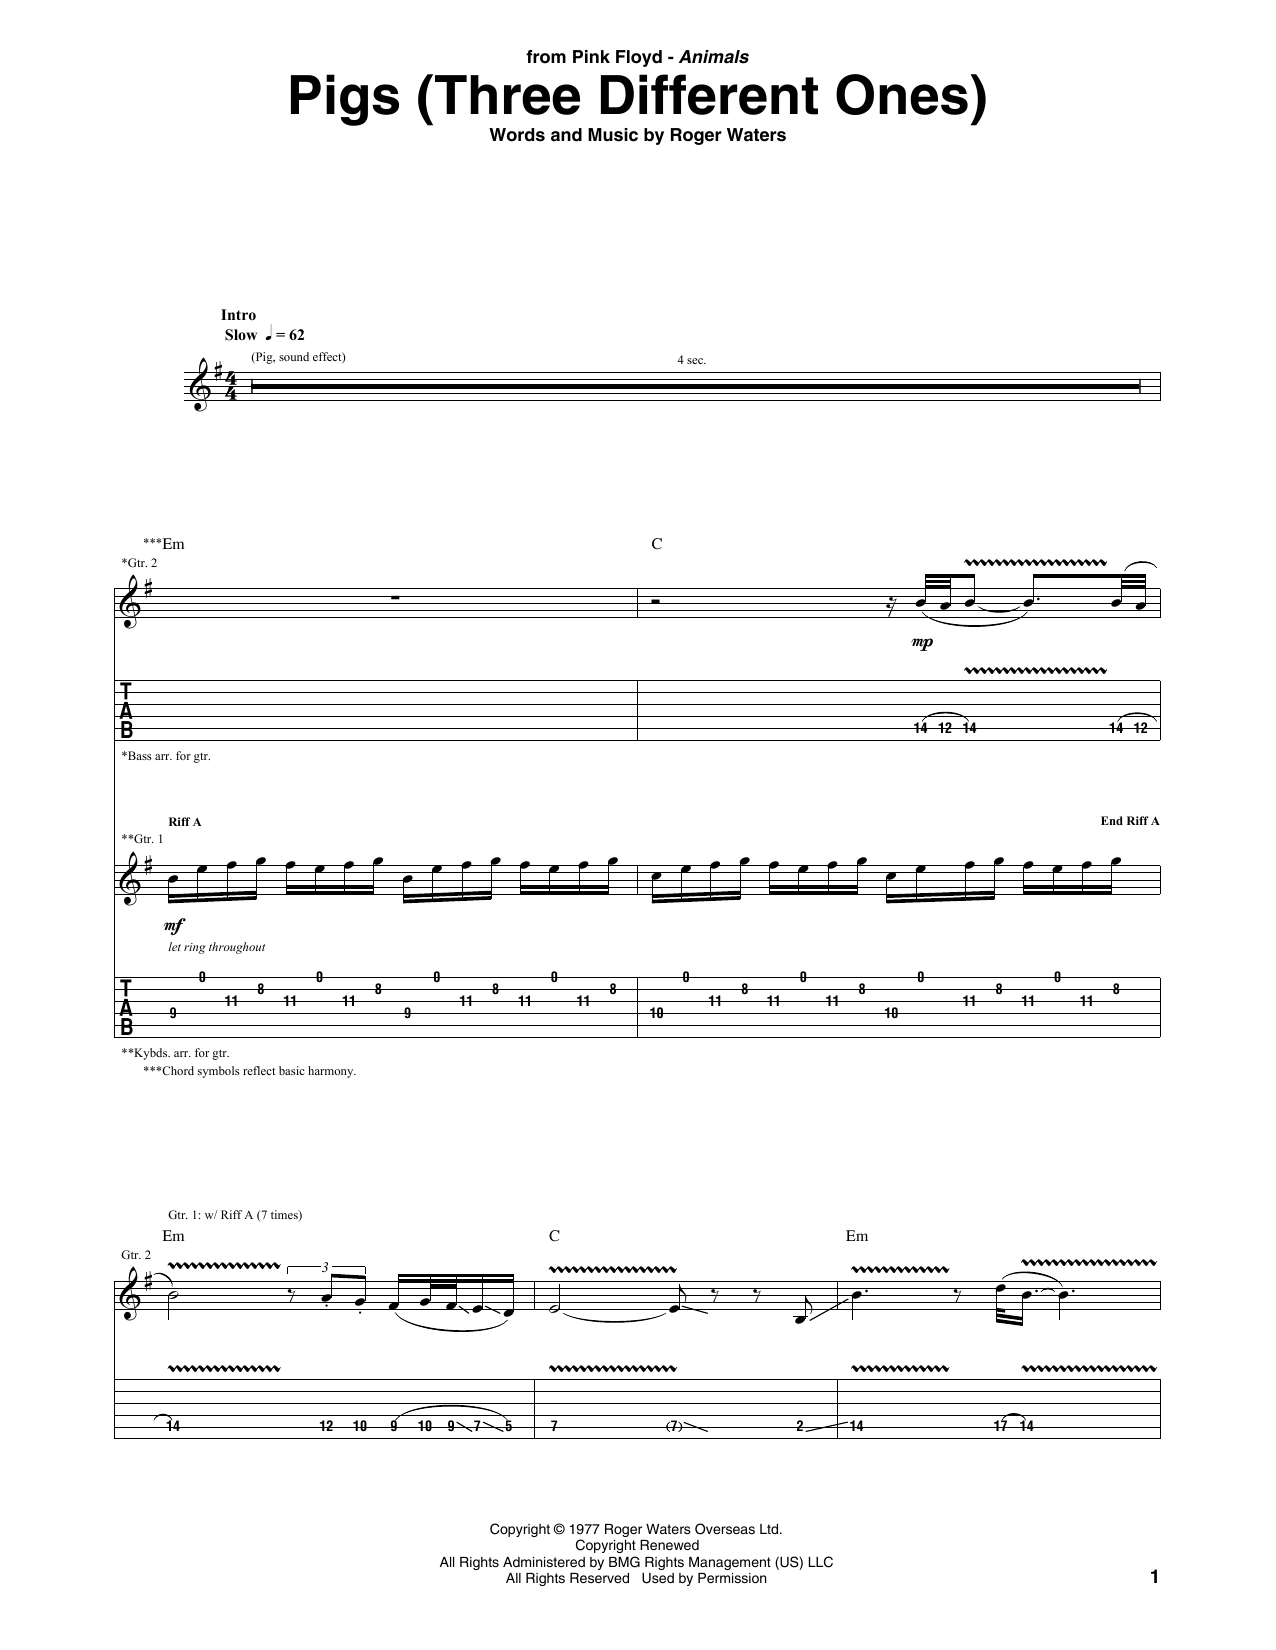 Download Pink Floyd Pigs (Three Different Ones) Sheet Music